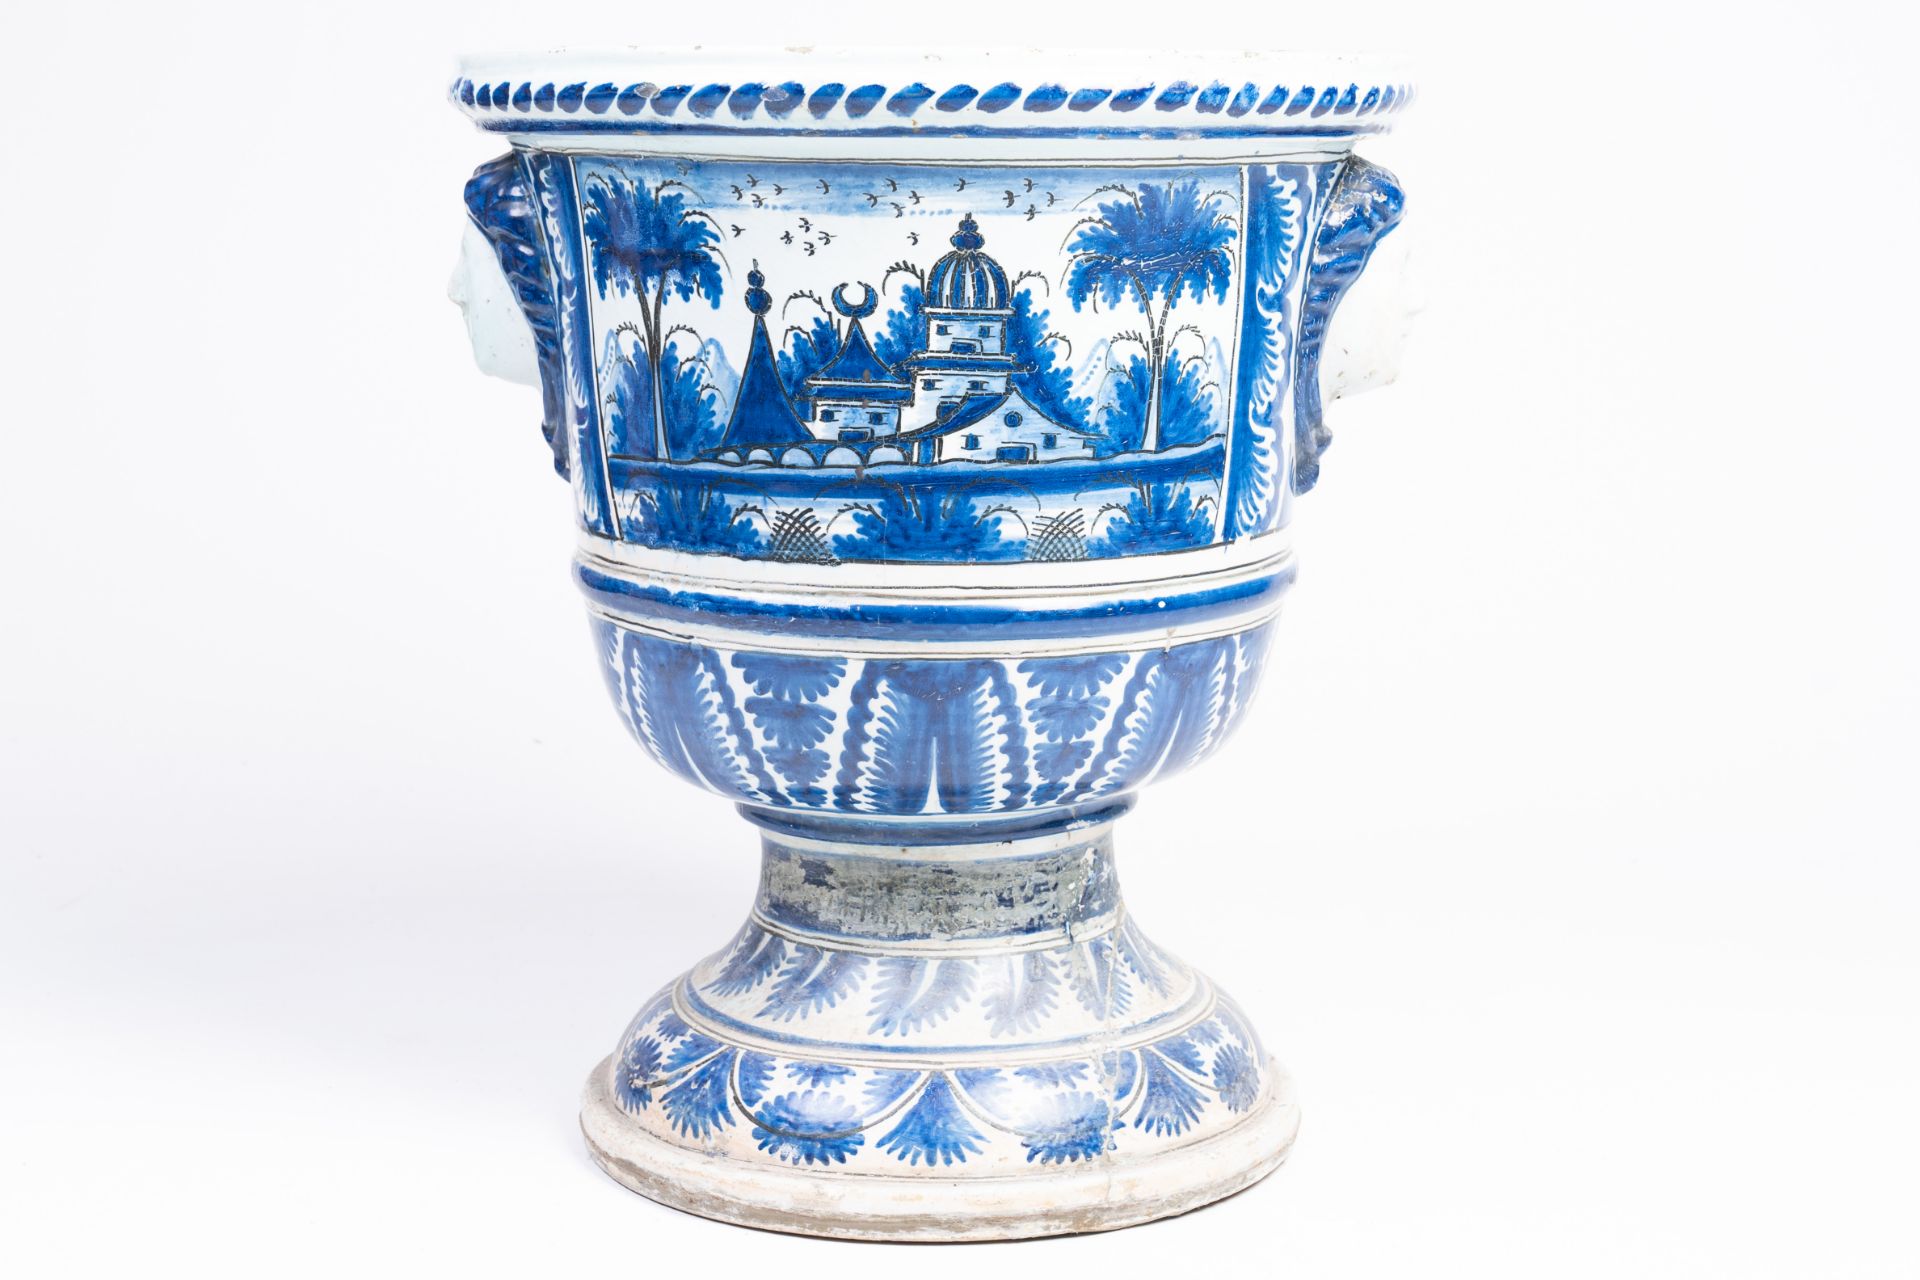 A large French blue and white earthenware Louis XIV vase on stand with oriental landscapes and masca